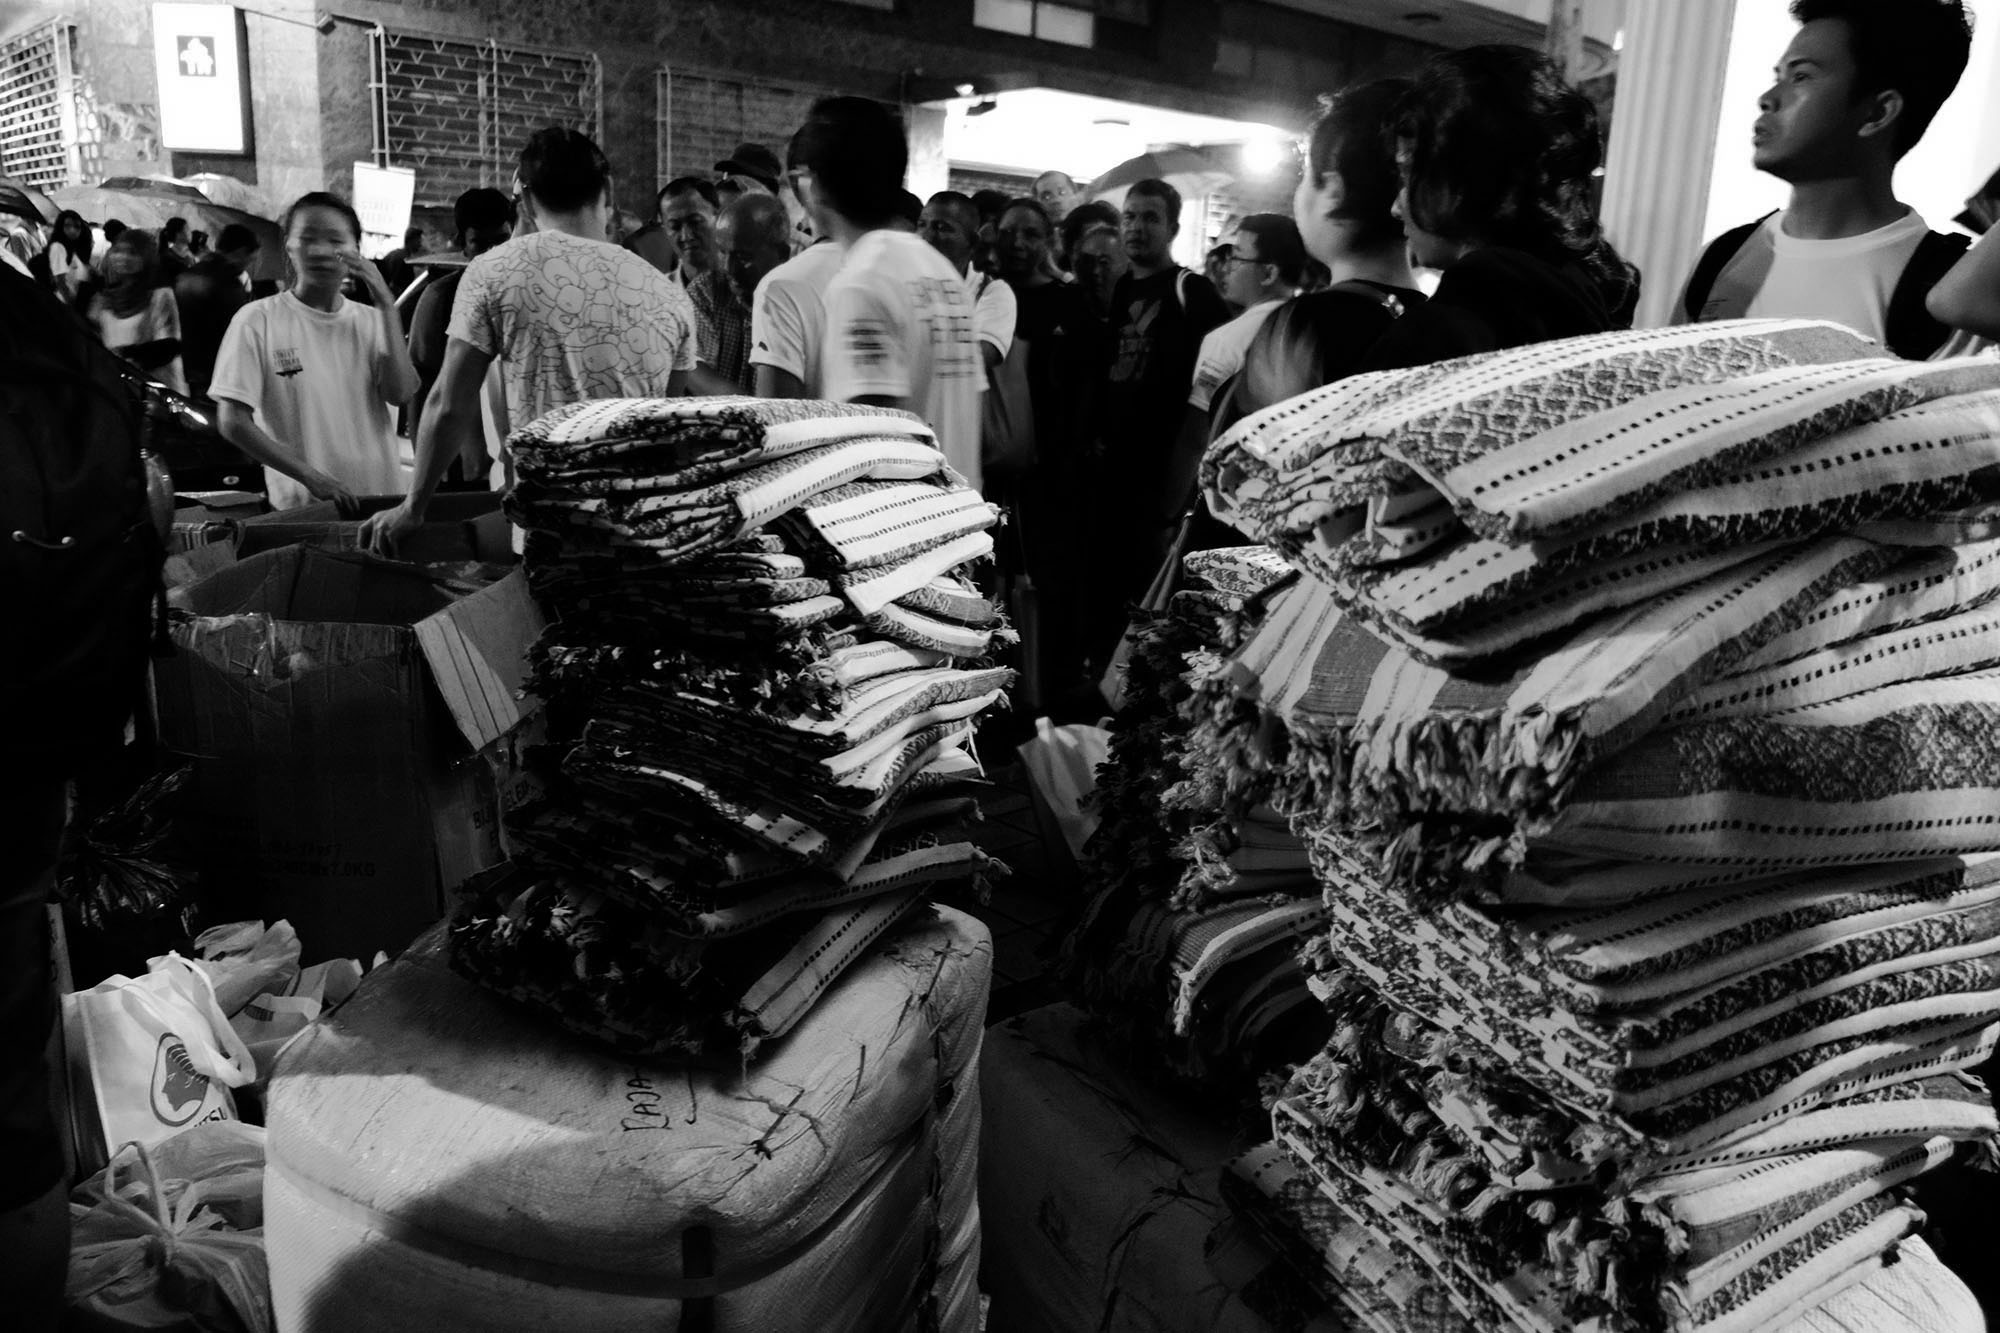 Blankets were part of the items offered to the beneficiaries (Photo by Kamal Sellehuddin/Coconuts KL)